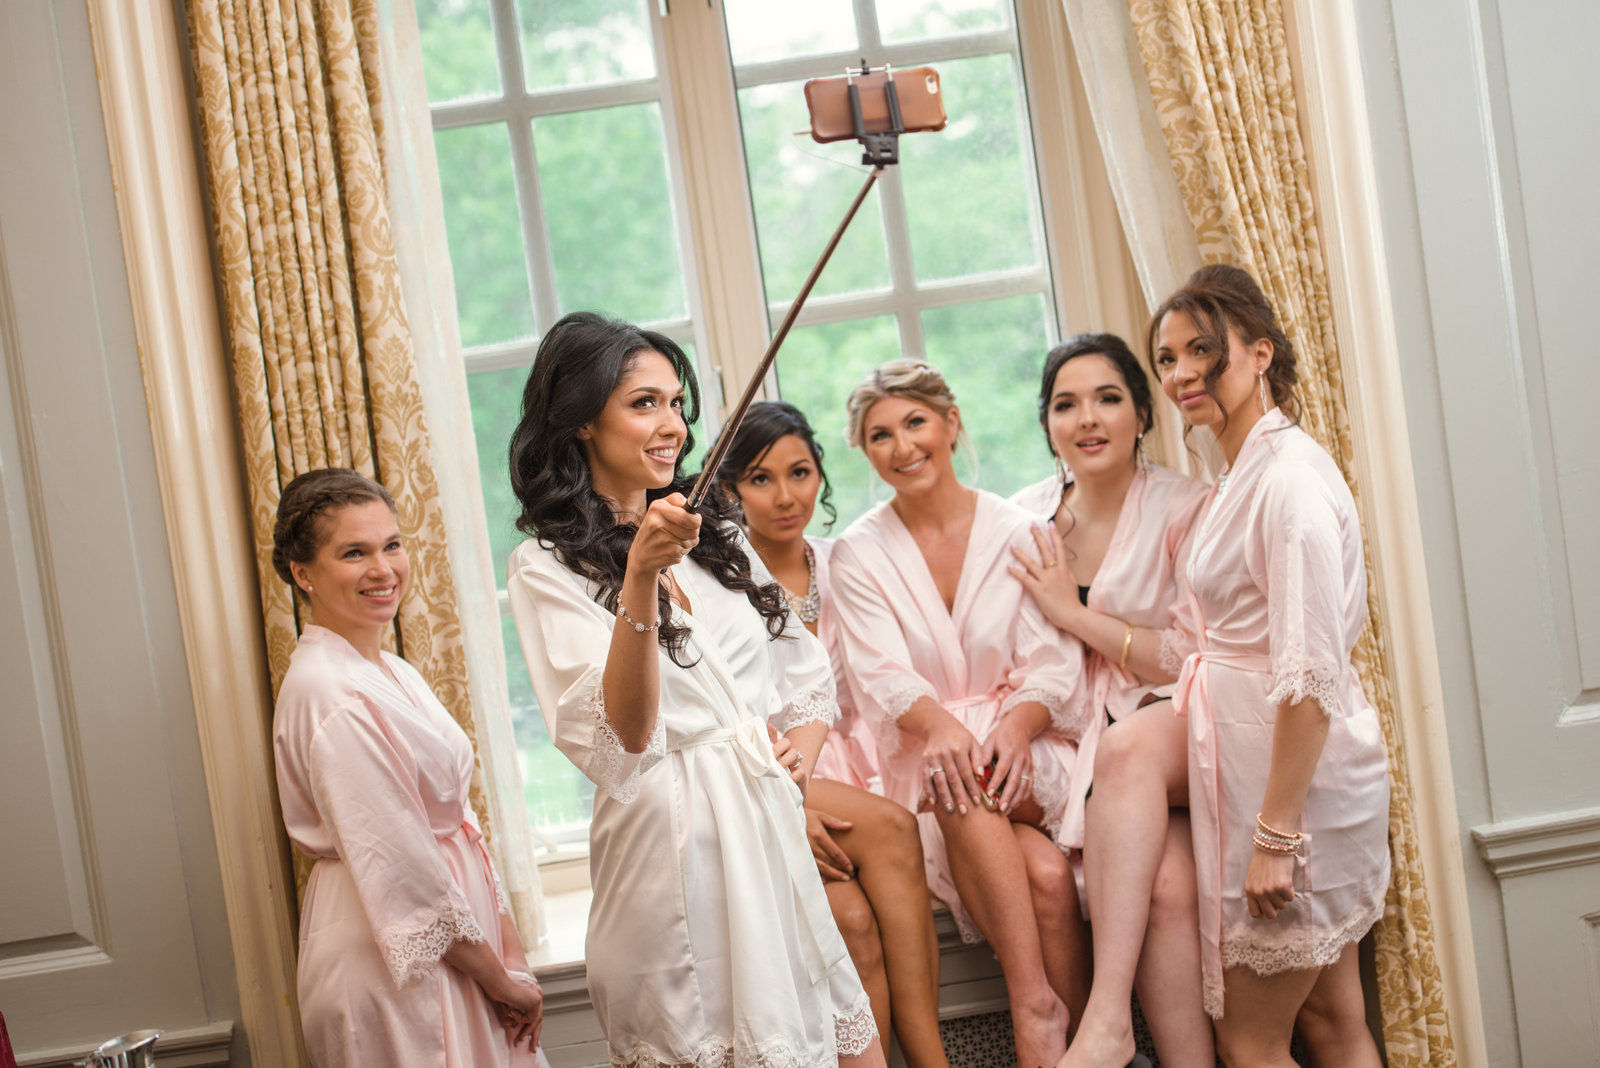 Bridesmaids selfie with the bride at Glen Cove Mansion